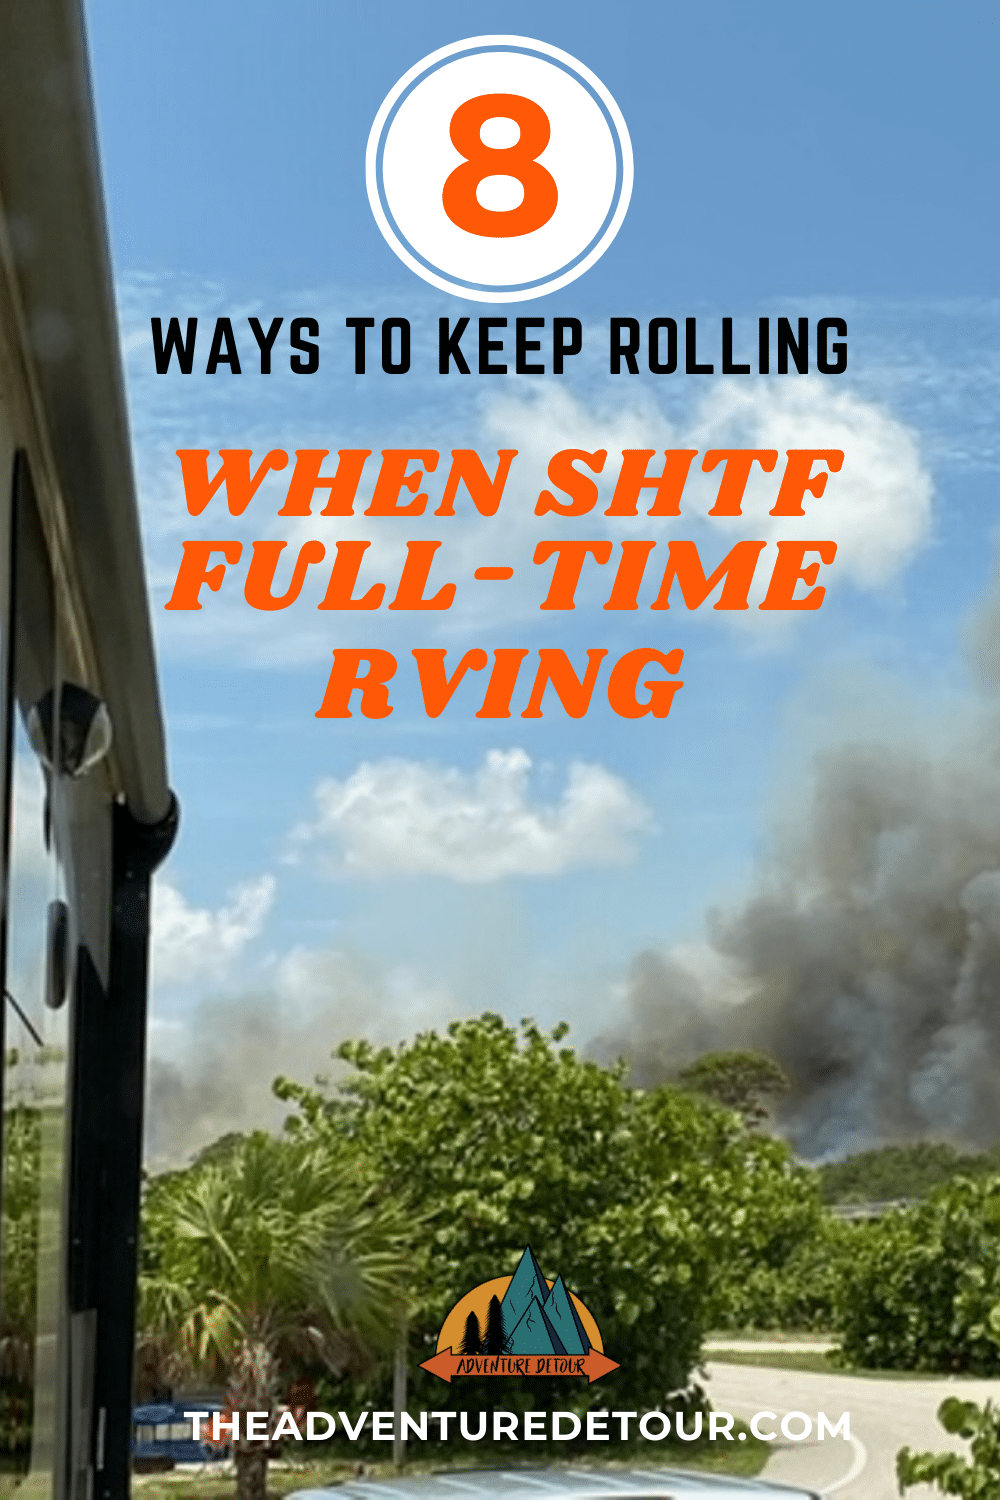 When SHTF Full-Time RVing Campground Fire